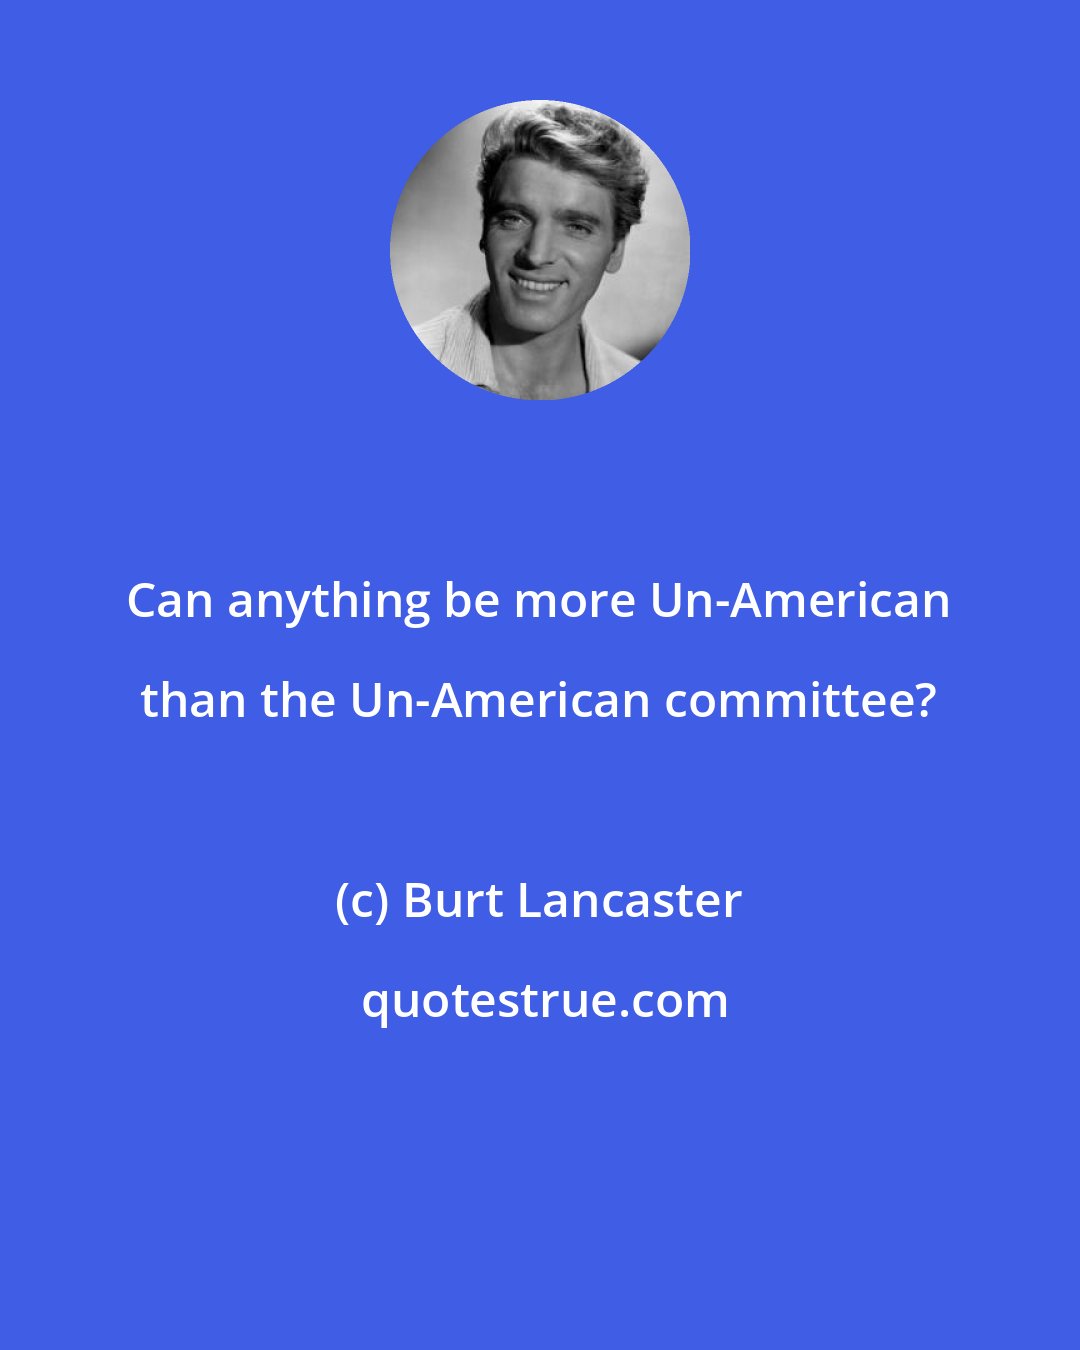 Burt Lancaster: Can anything be more Un-American than the Un-American committee?